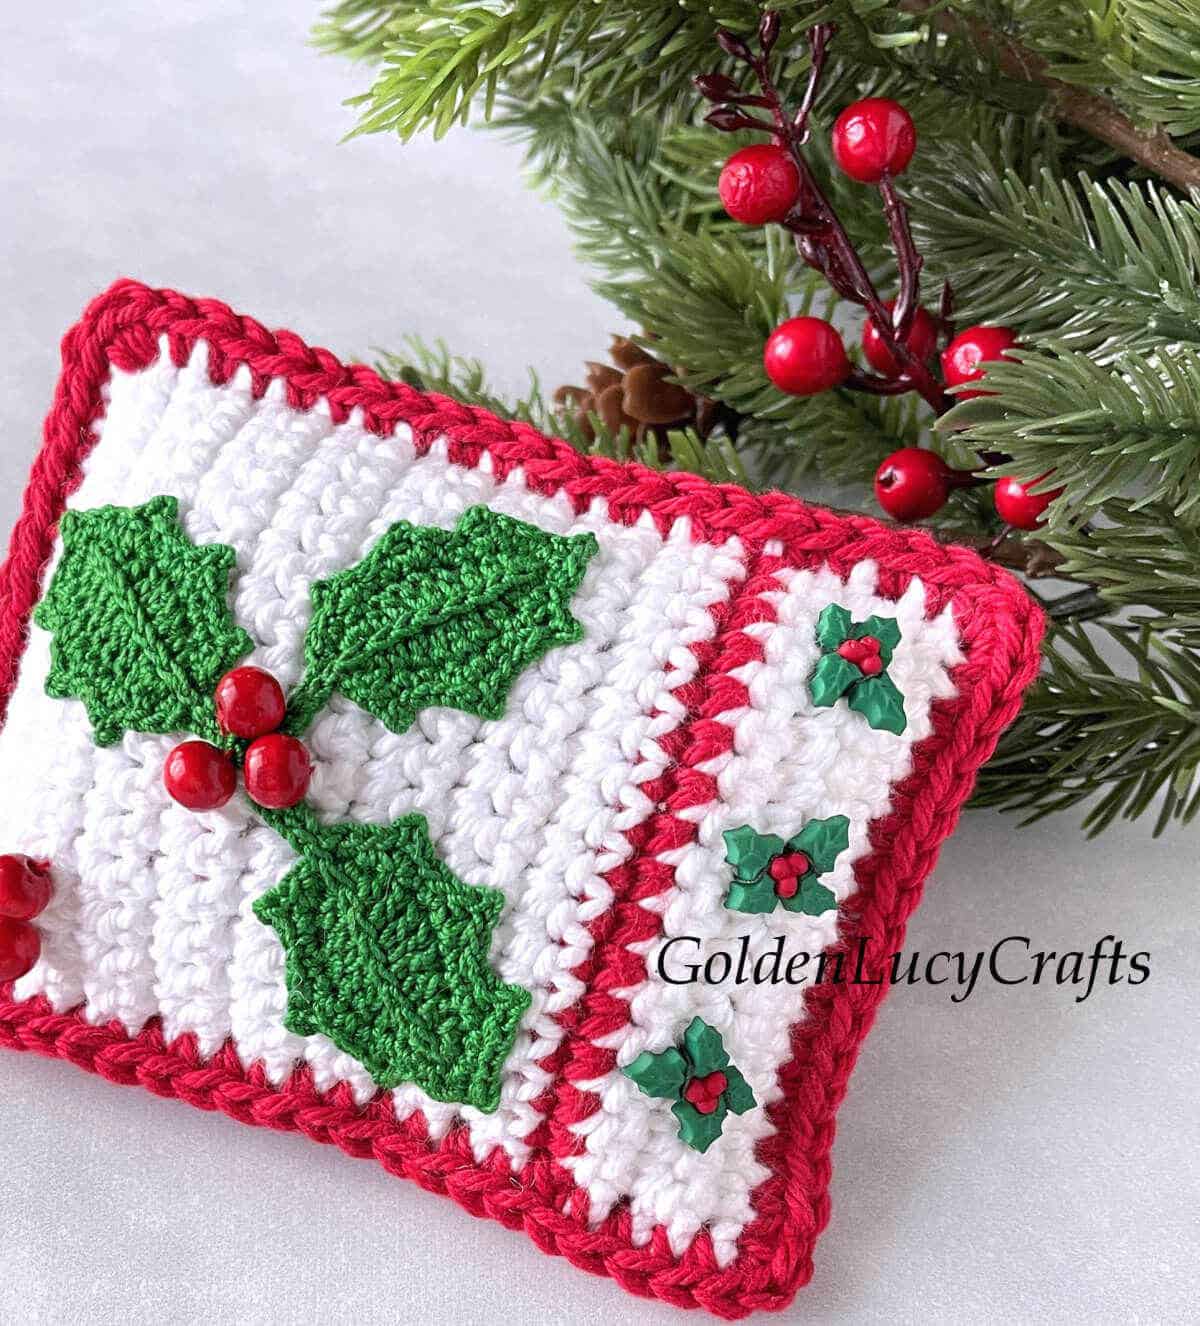 Crocheted mini pillow for Christmas decor close up picture.